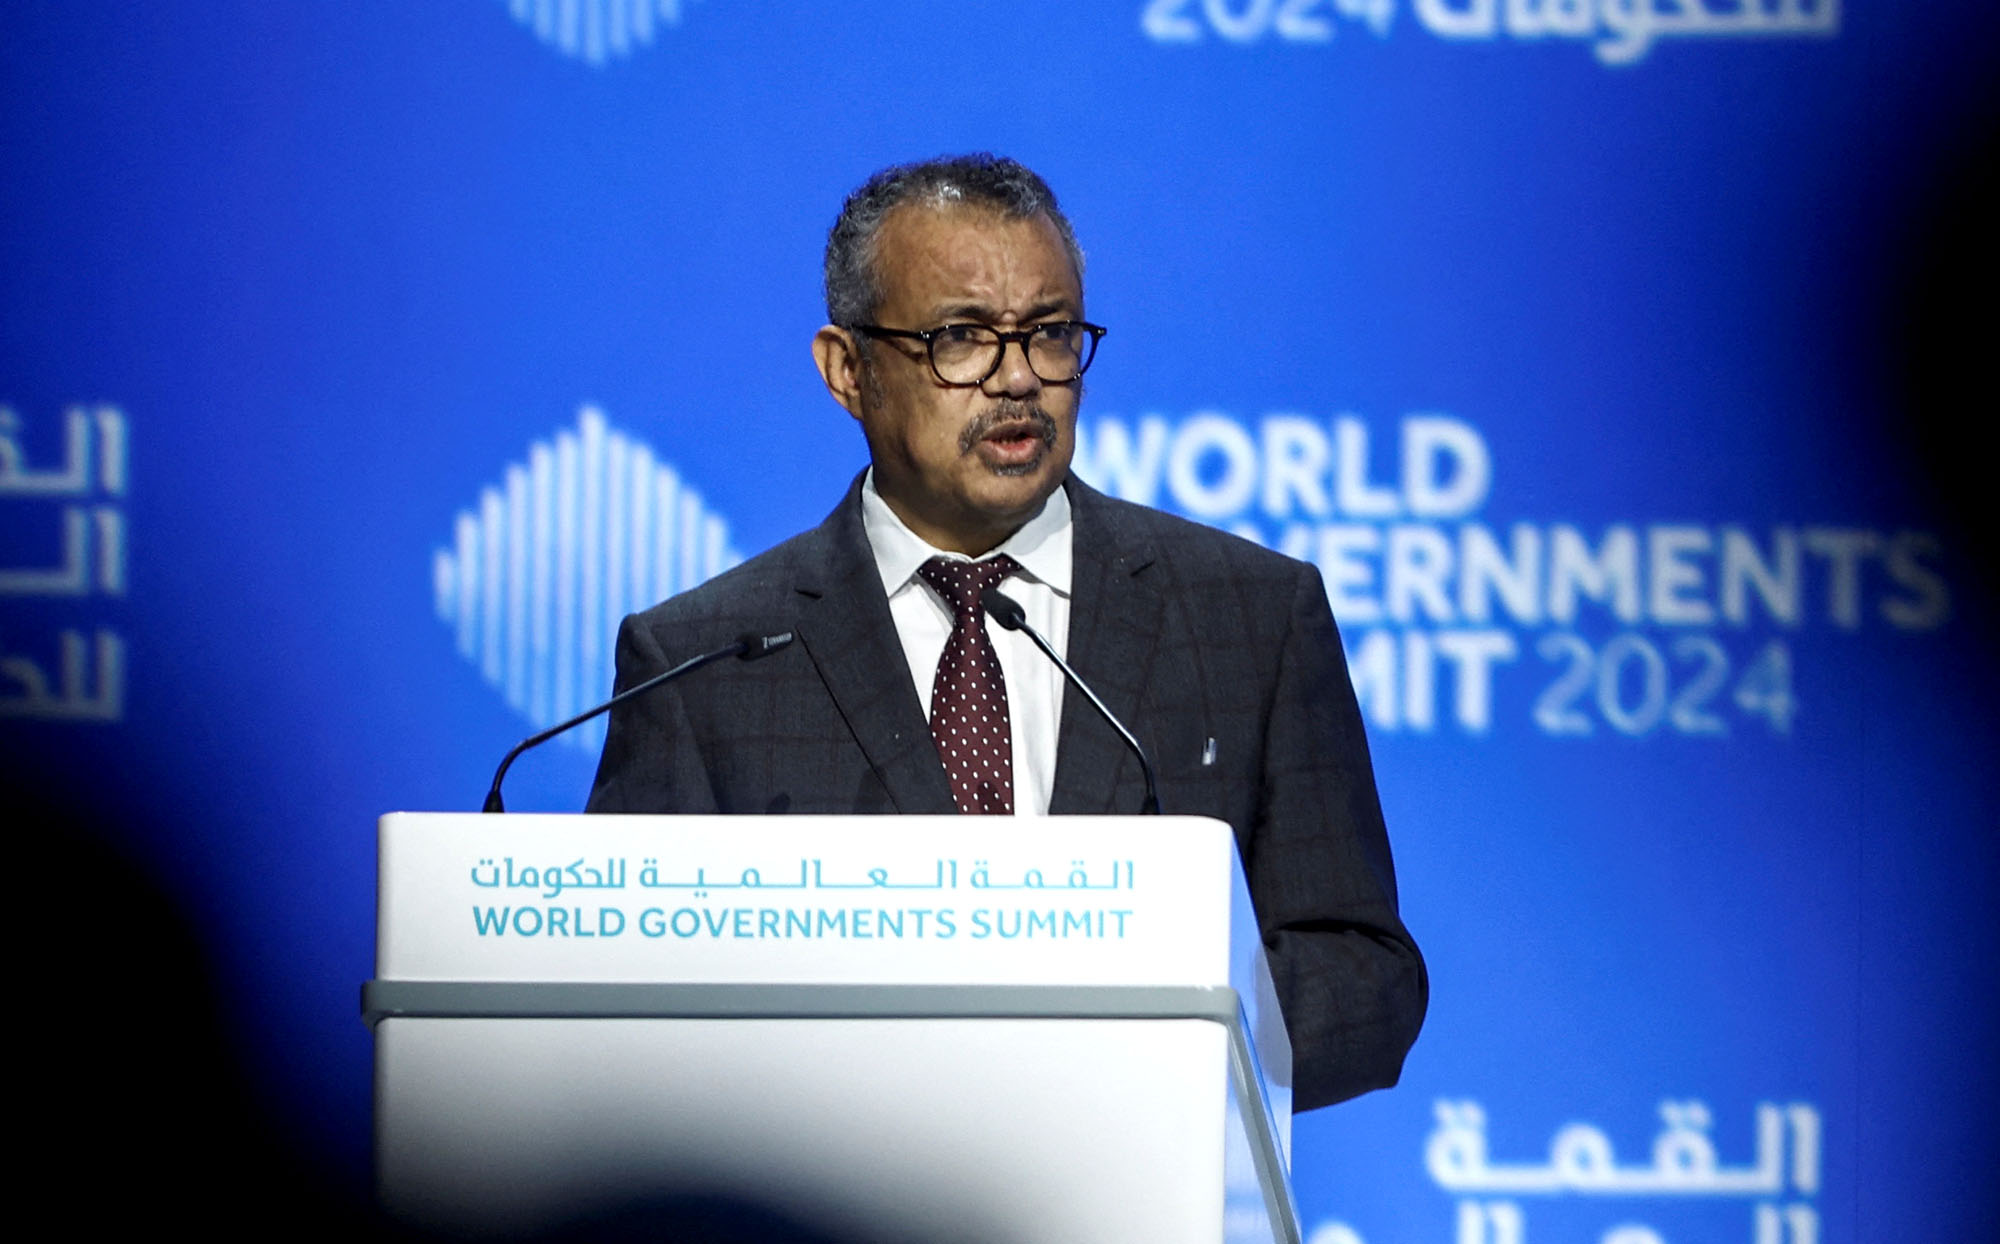 Director-General of the World Health Organisation Dr. Tedros Adhanom Ghebreyesus speaks as he attends a session of the World Governments Summit, in Dubai, United Arab Emirates, on February 12.